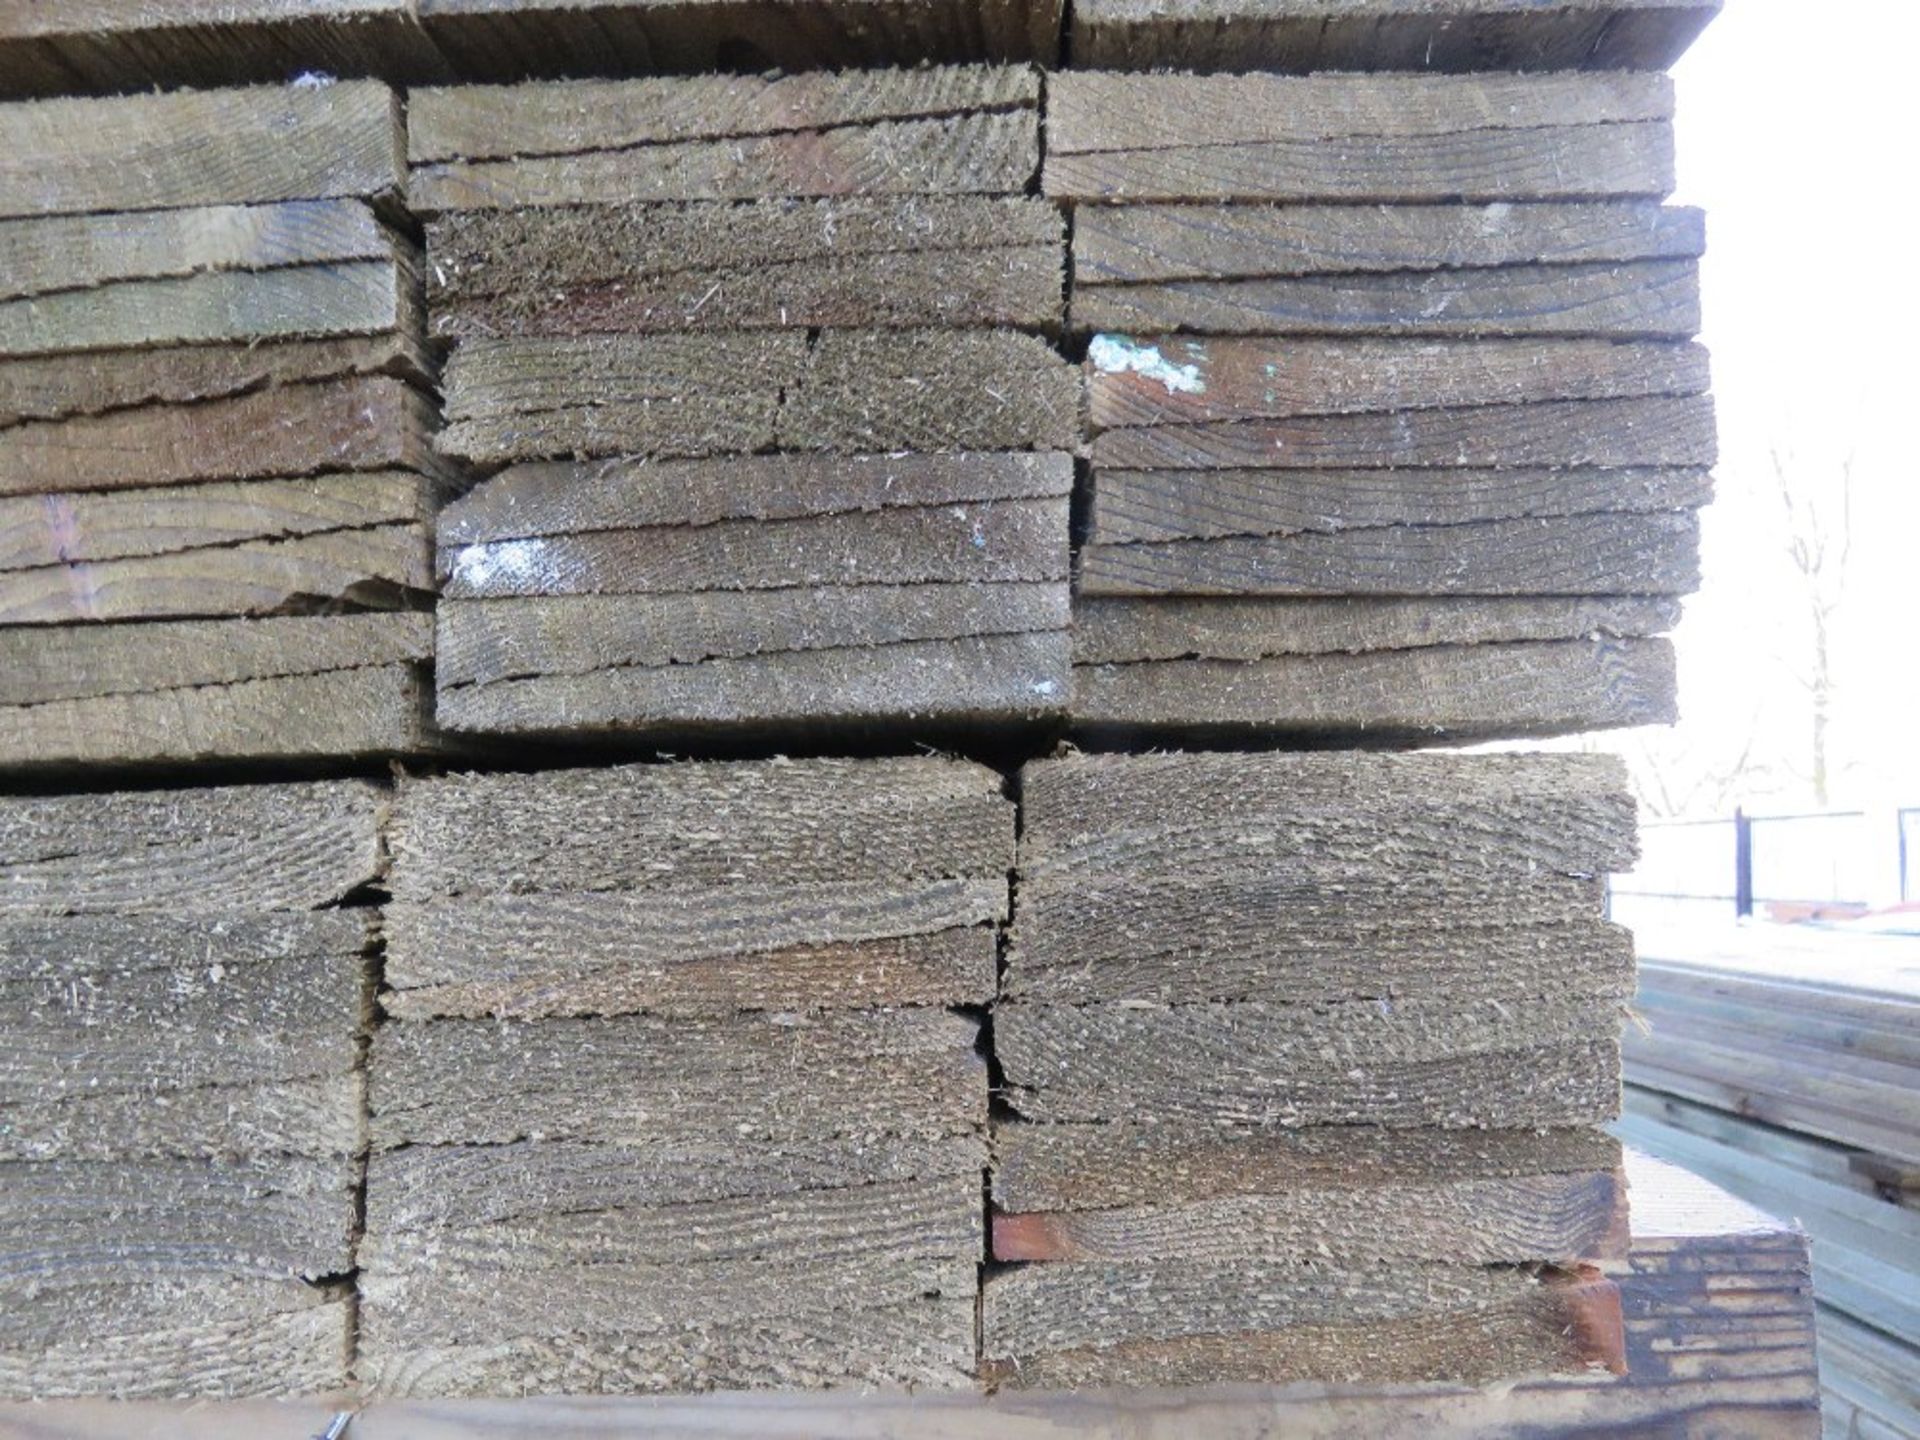 LARGE BUNDLE OF PRESSURE TREATED FEATHER EDGE TIMBER CLADDING: 1.2M LENGTH X 10CM WIDTH APPROX. - Image 3 of 3